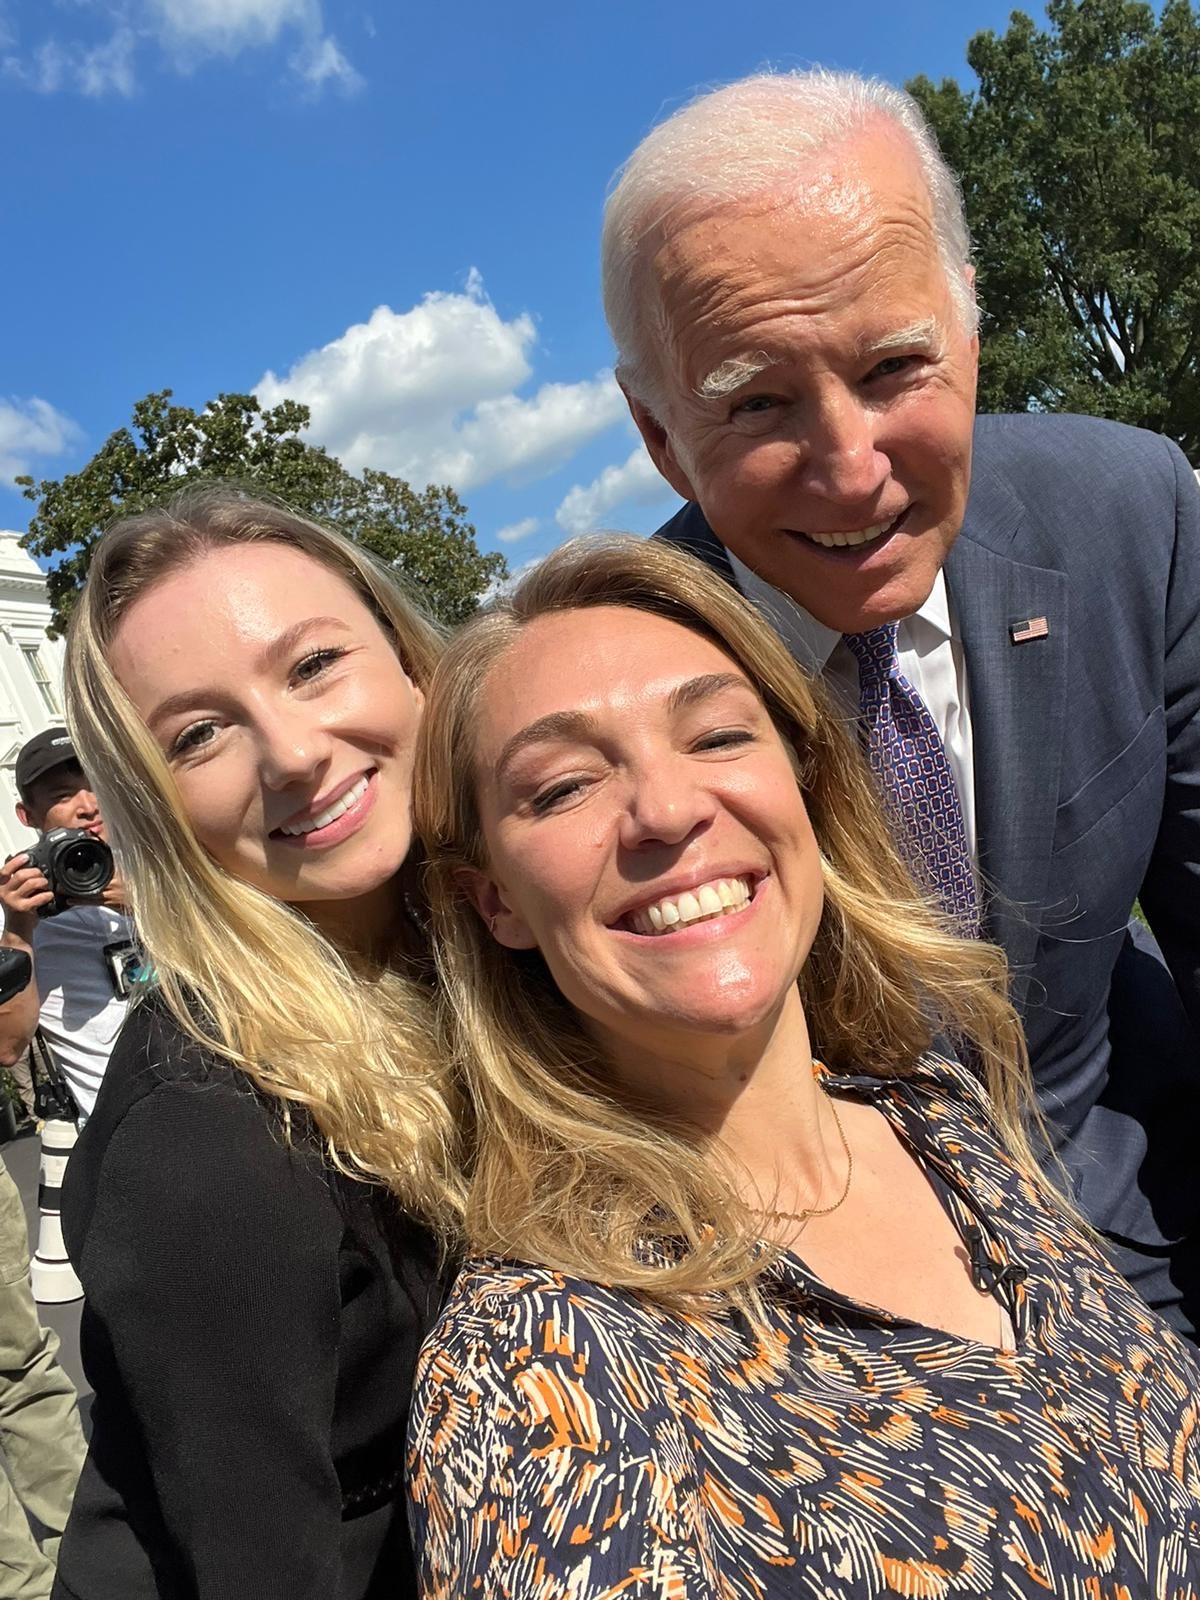 Sophie Morgan and Keely Cat Wells smiling in a selfie with President Biden.